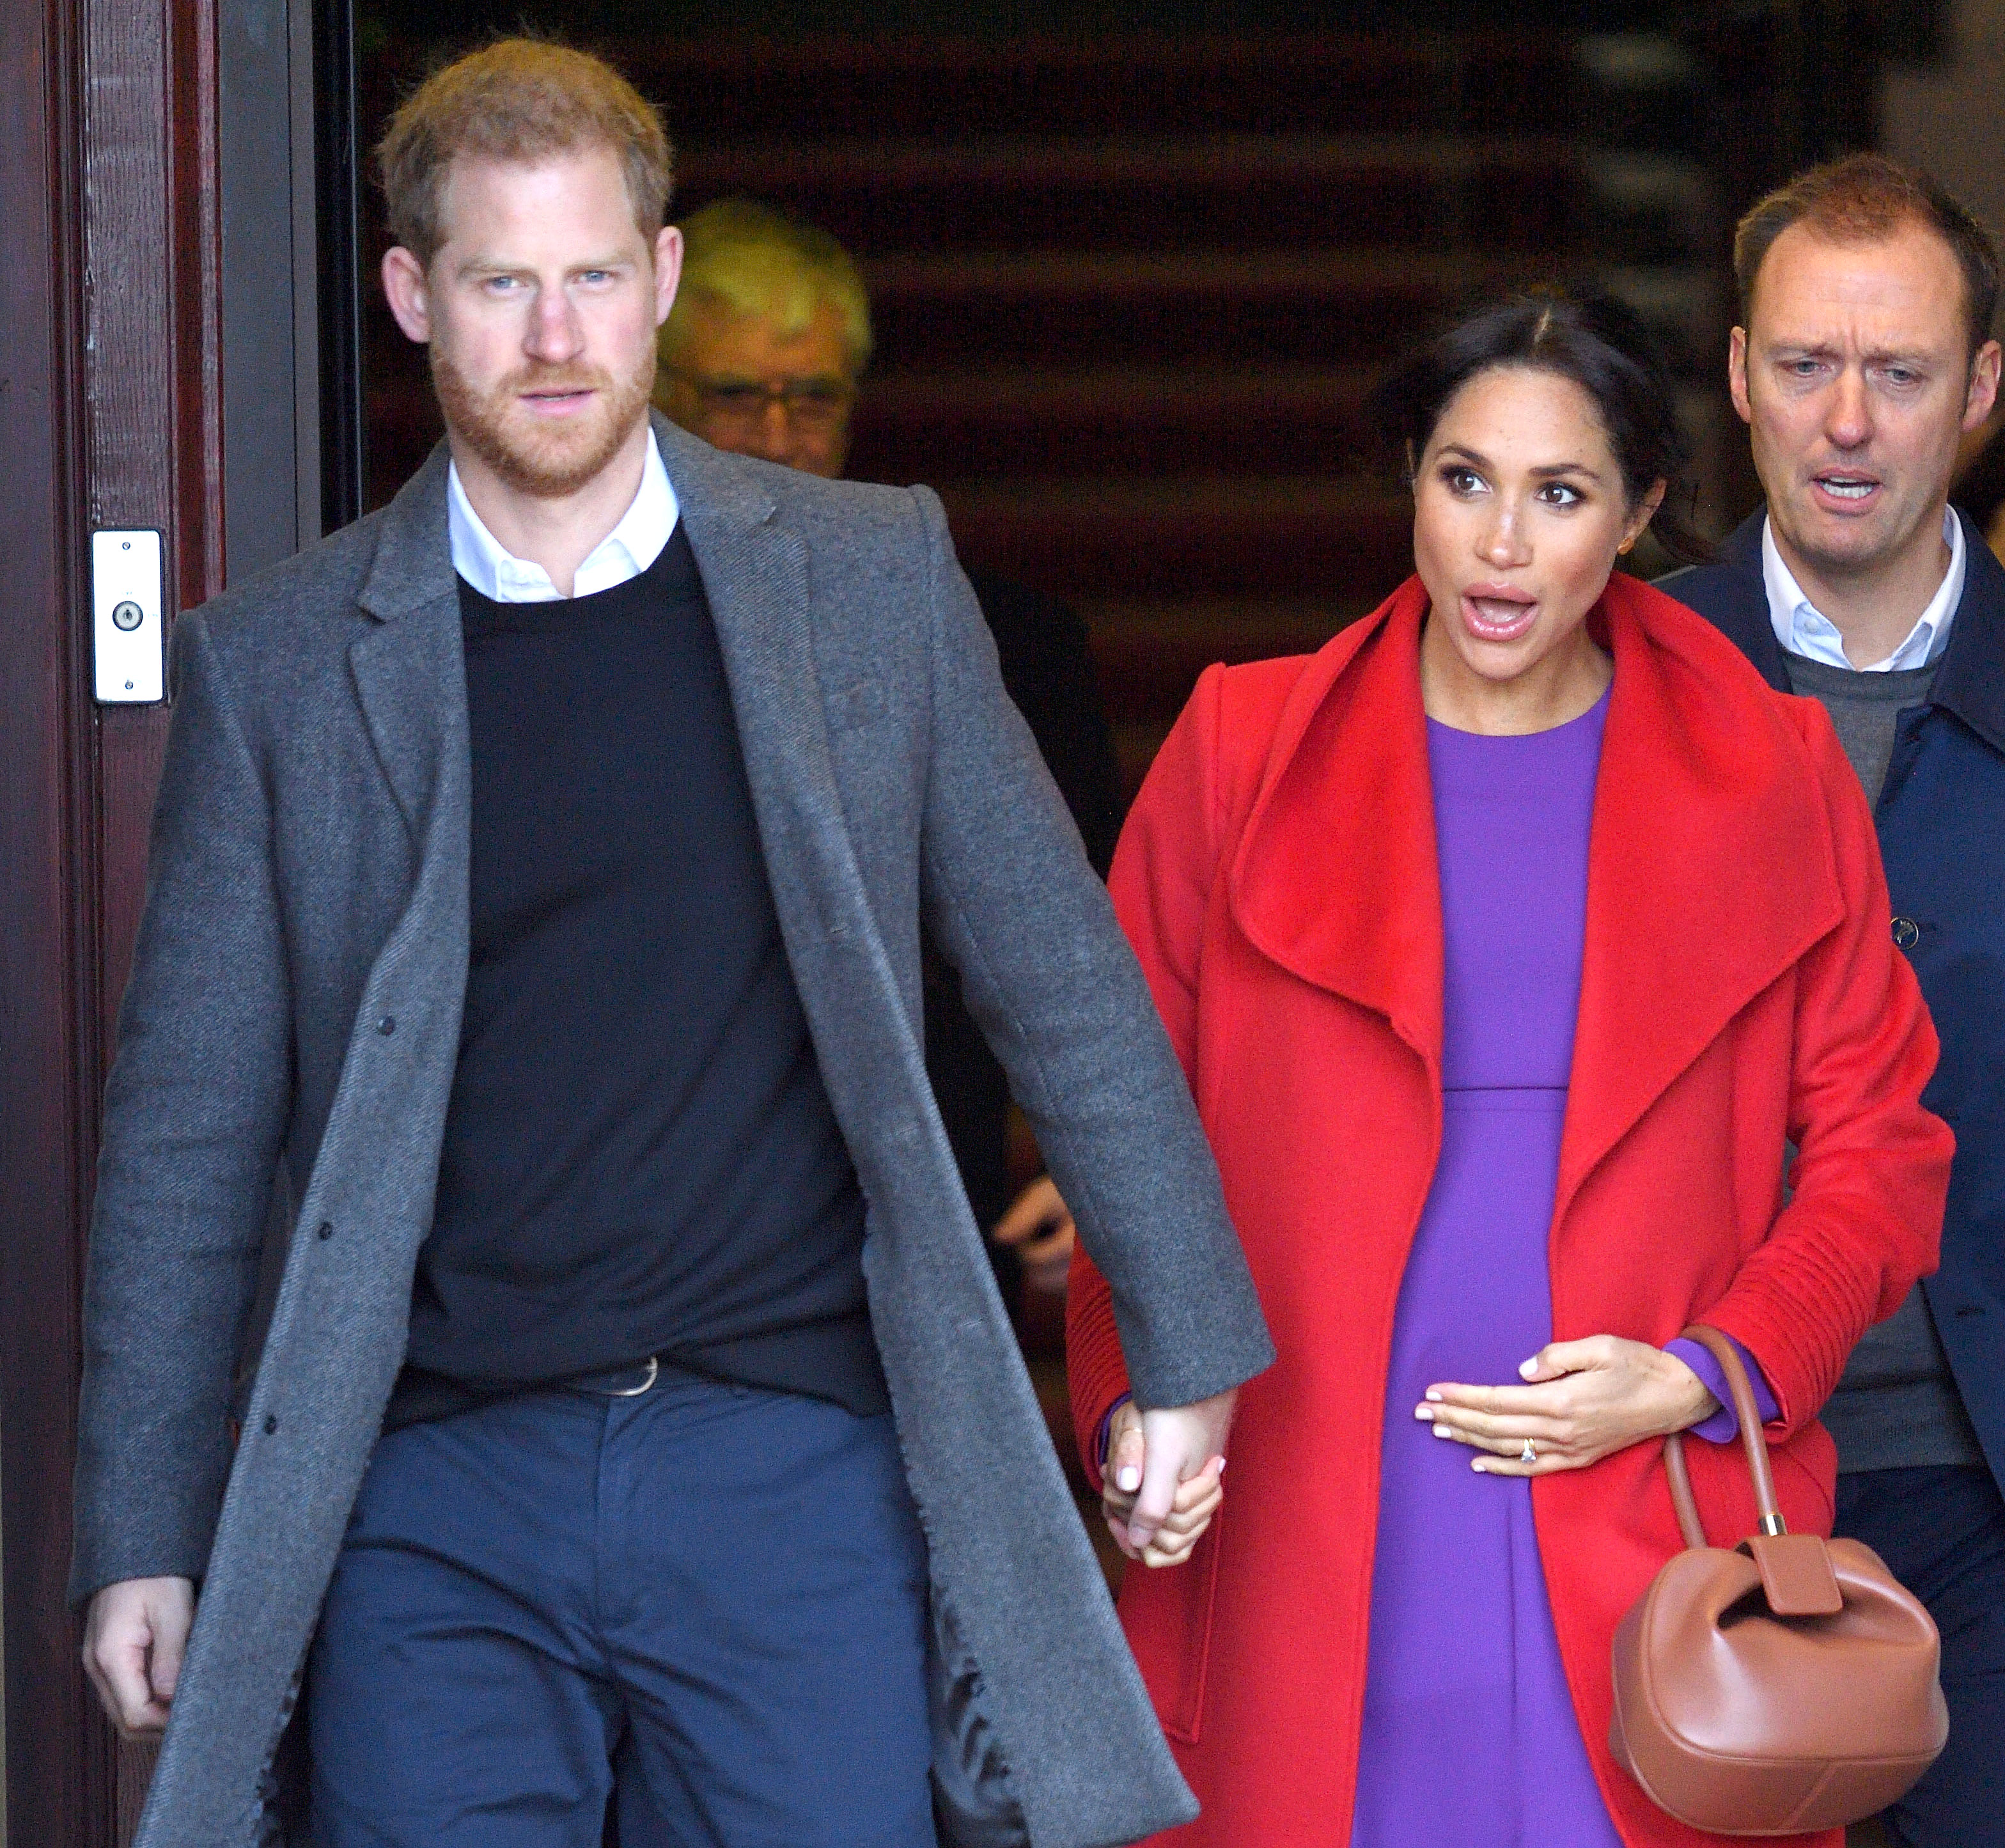 Stalkers and Swingers Scare Off Meghan and Harry Embed